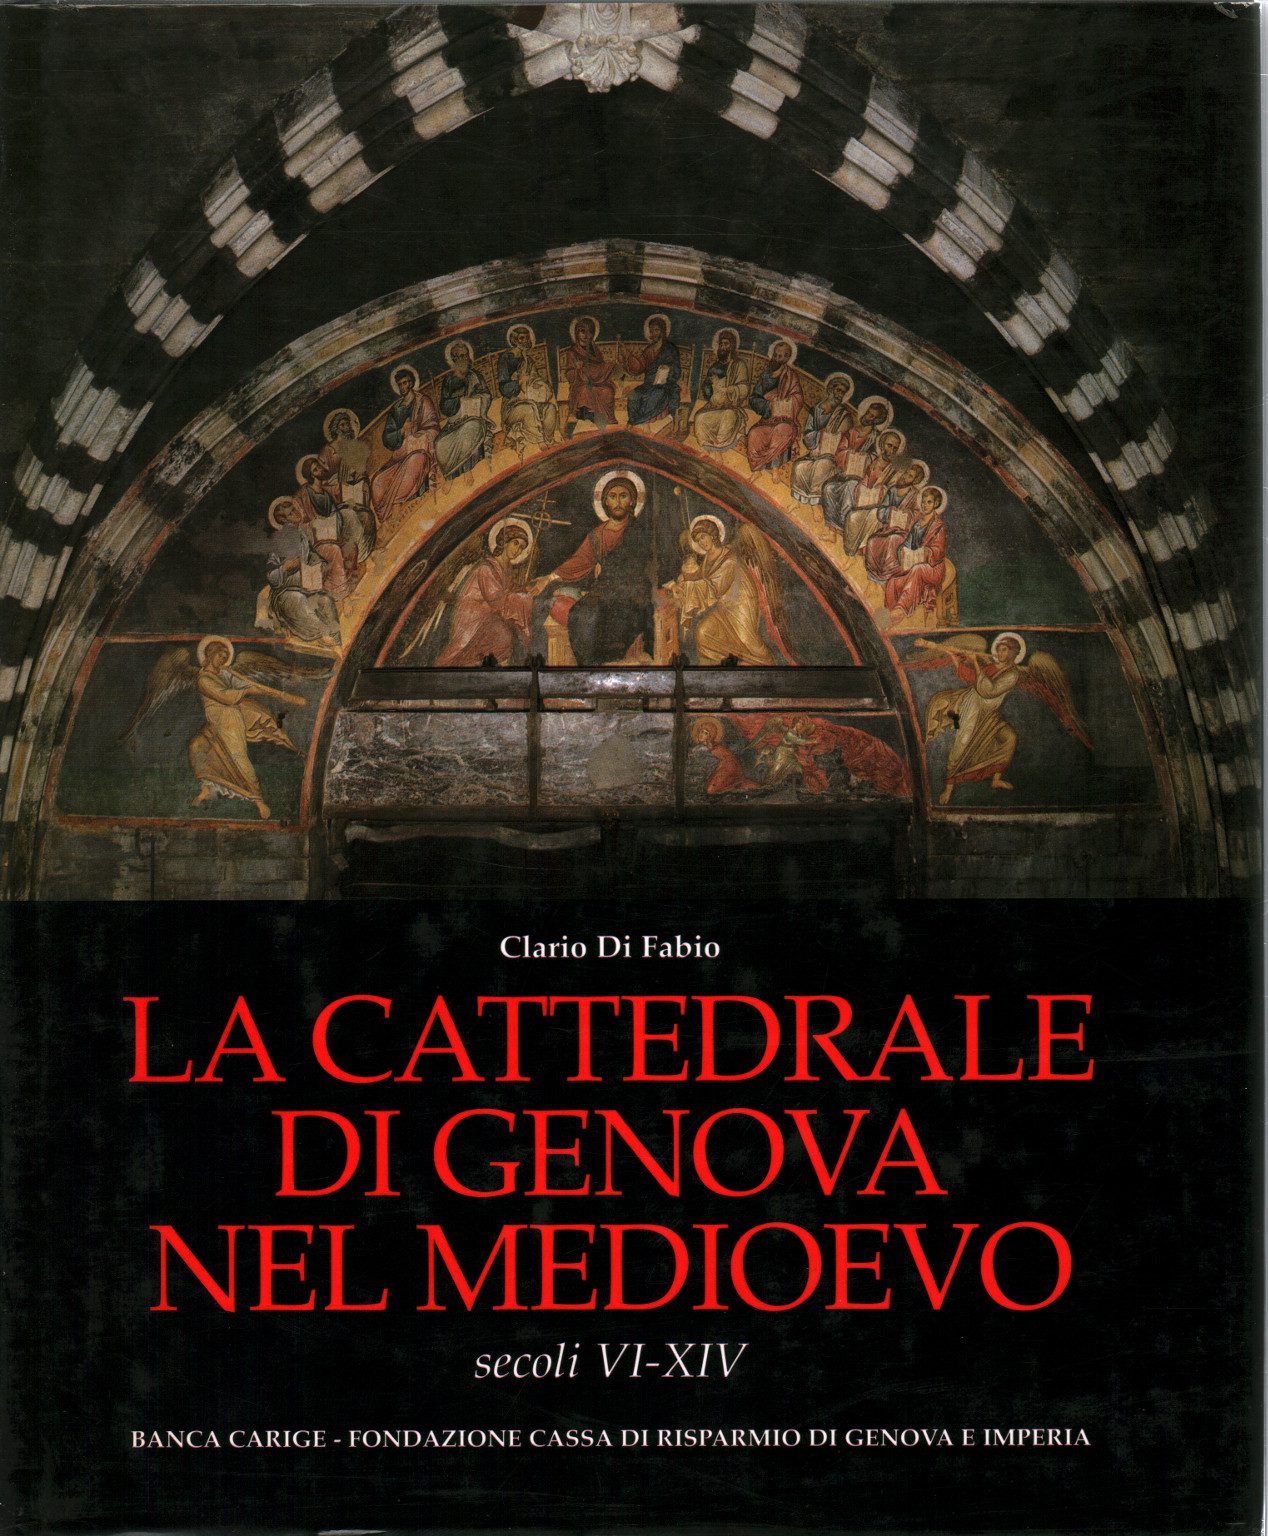 The cathedral of Genoa in the Middle Ages